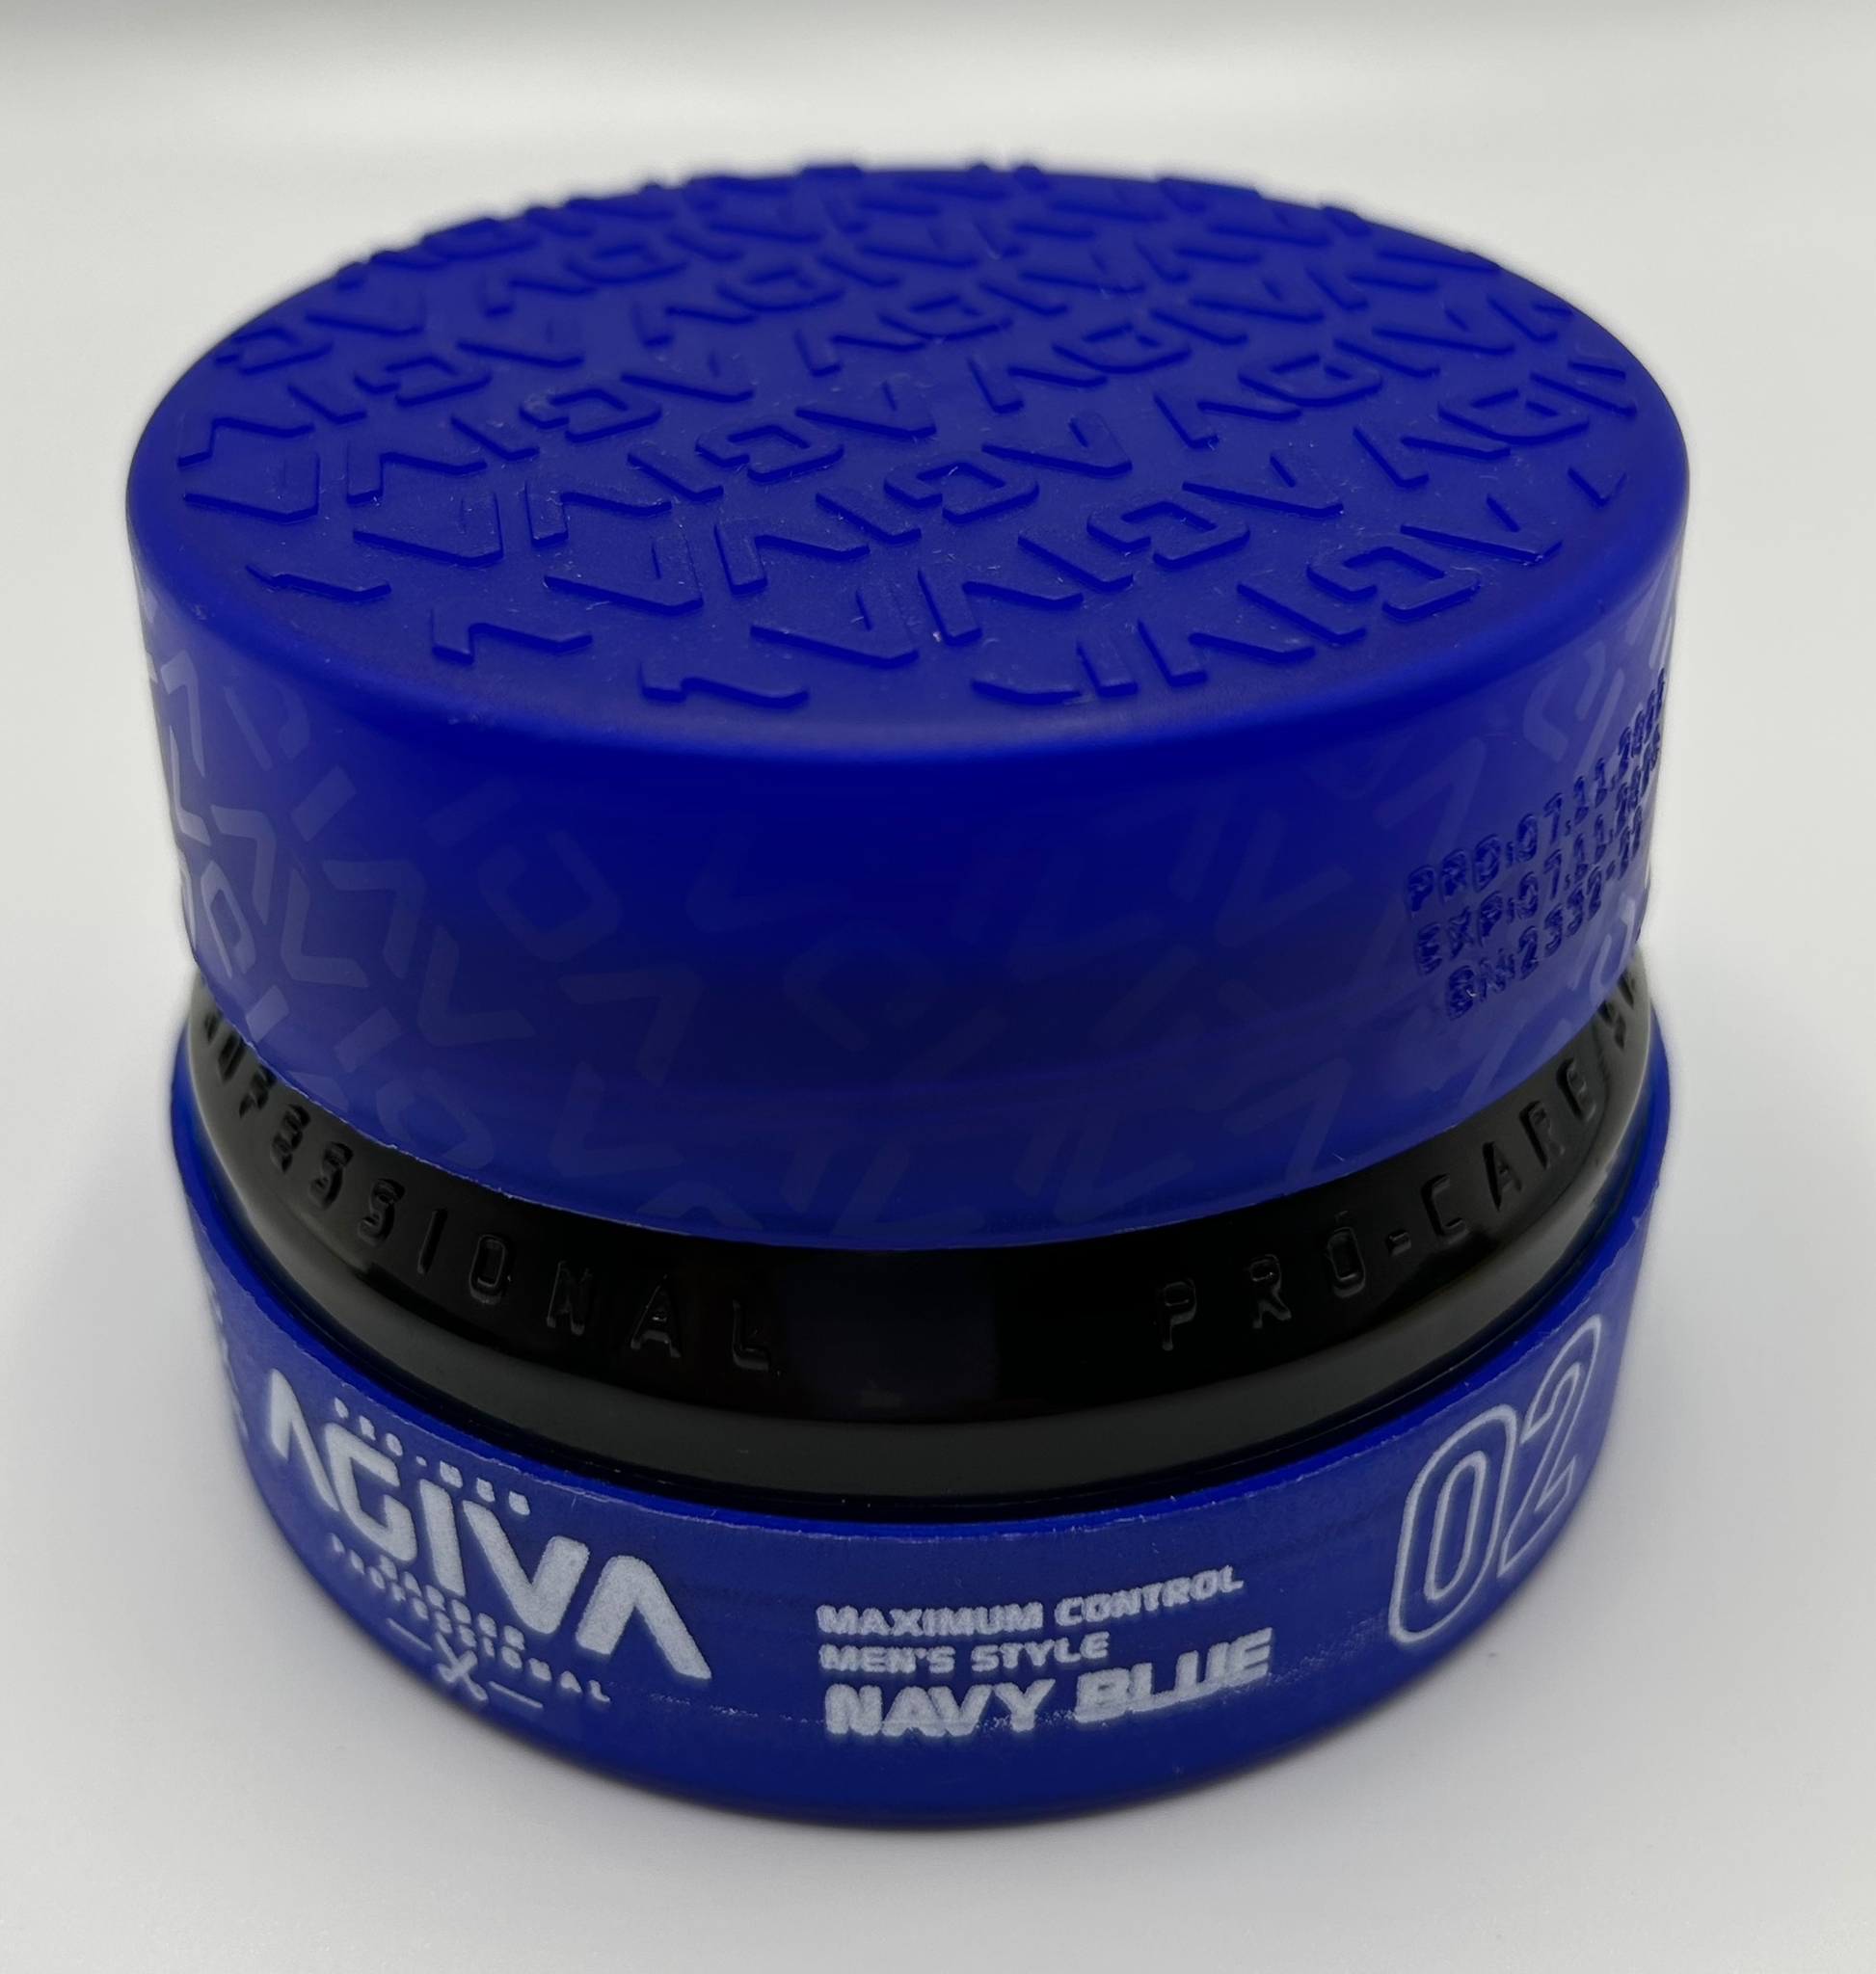 AGIVA HAIR WAX NO 2 STRONG HOLD 155ML